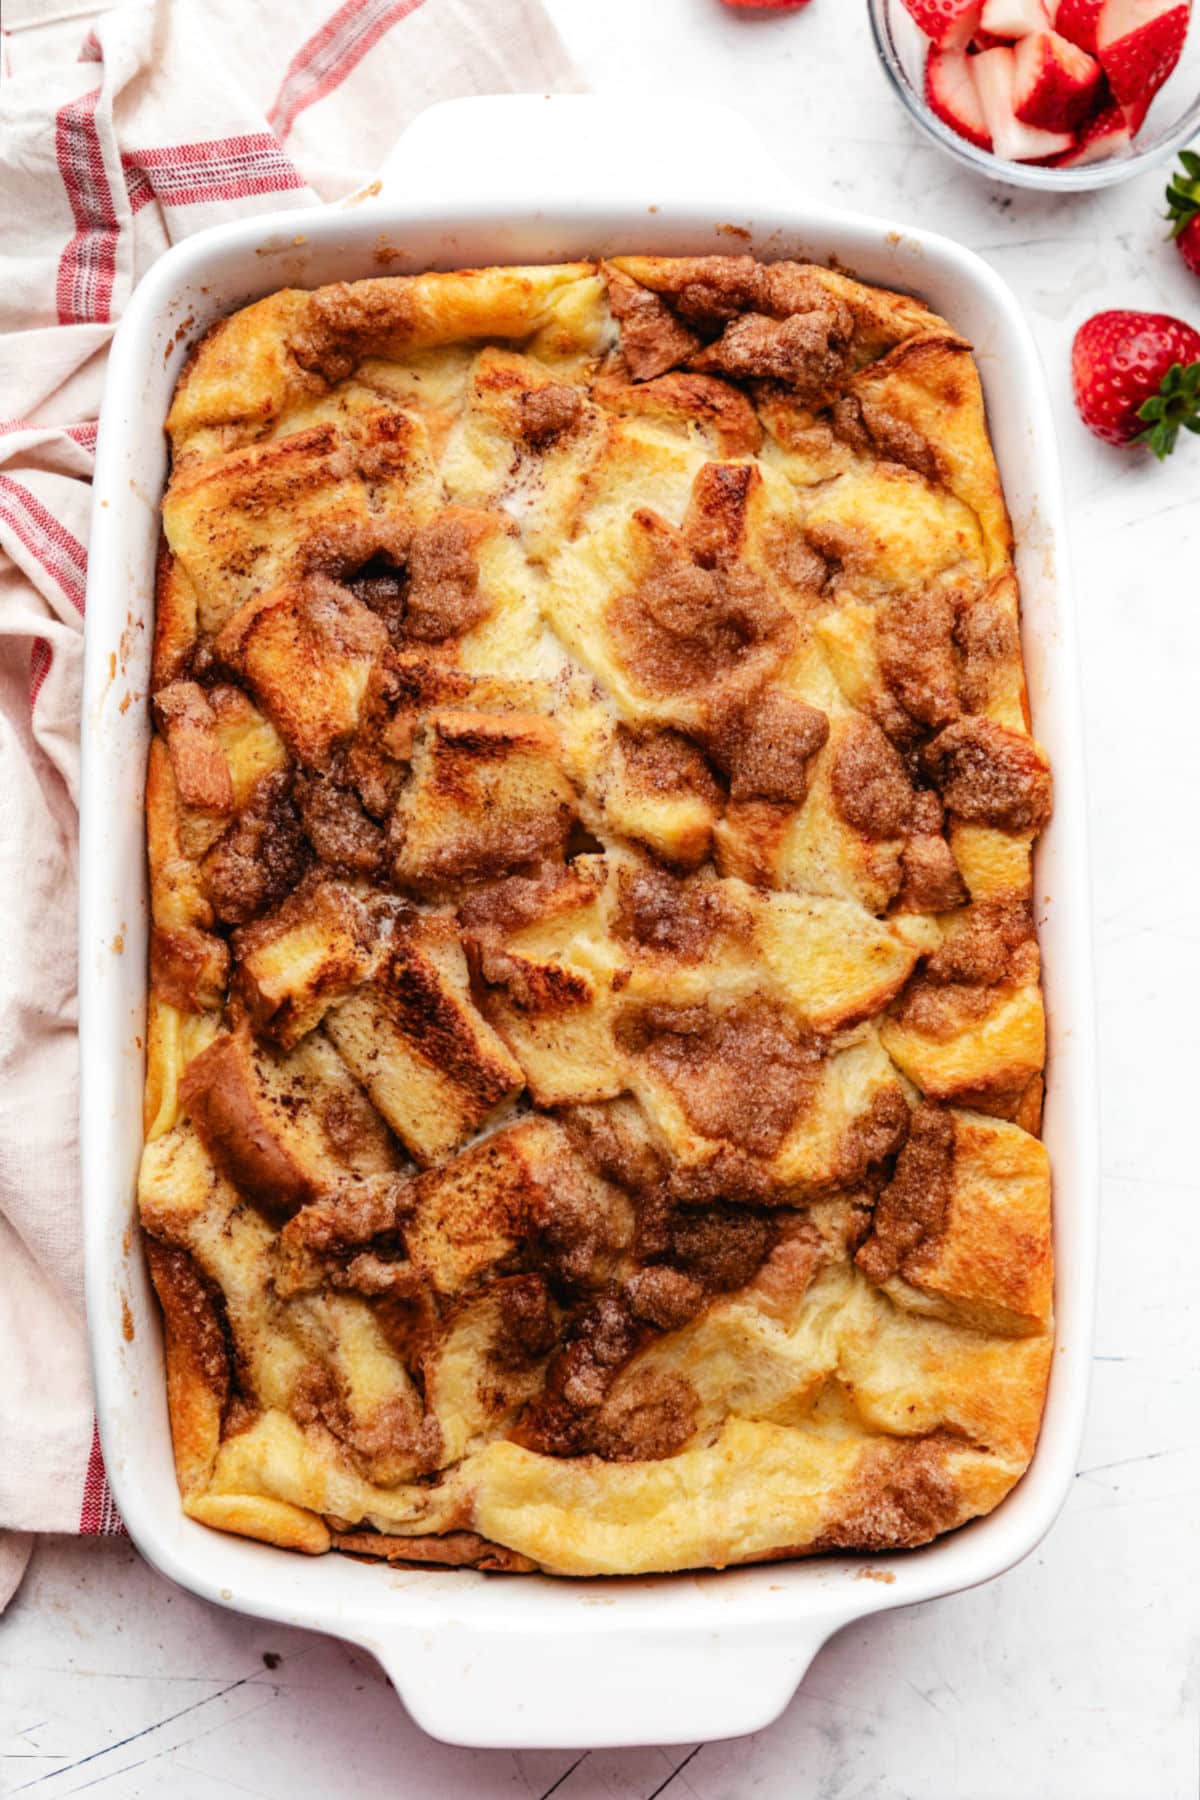 A baked French toast casserole in a white baking dish next to a bowl of sliced strawberries.